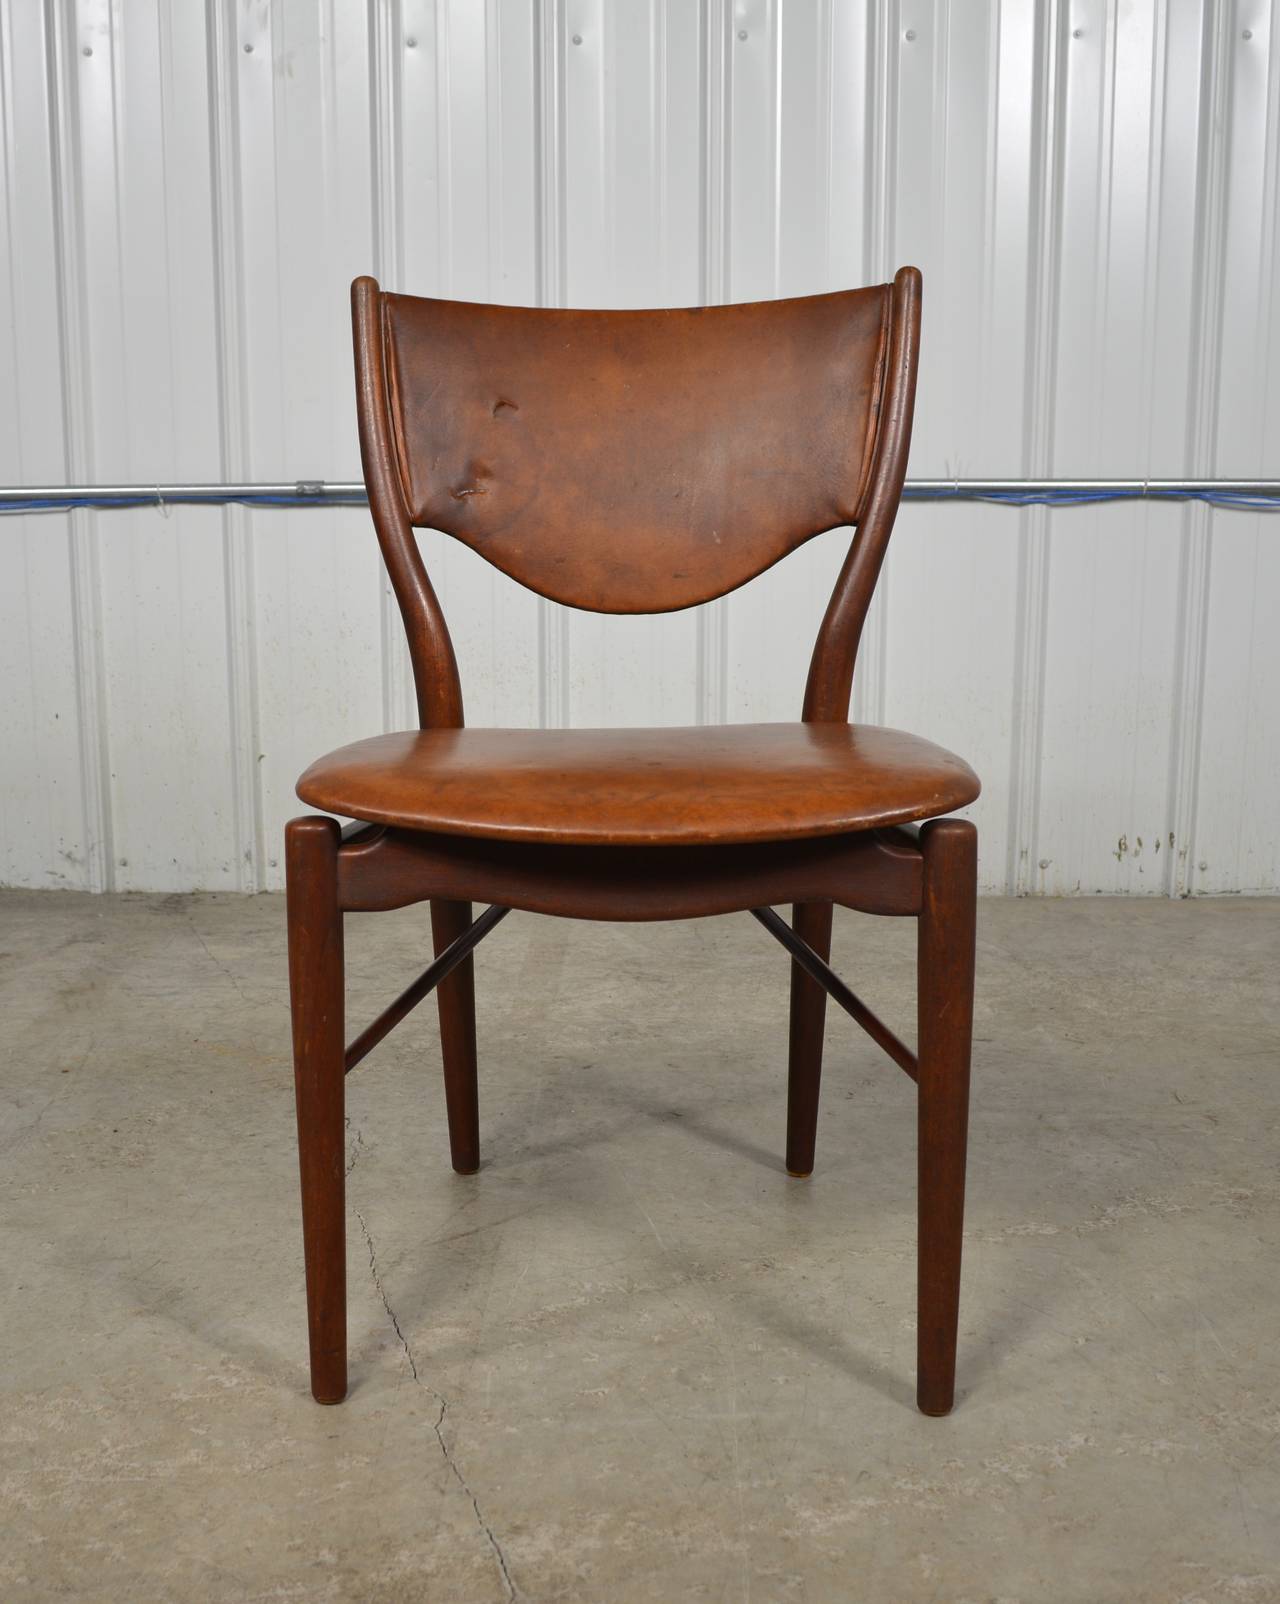 Beautifully sculpted teak and leather side chair by Finn Juhl. Original condition. Leather shows a nicely aged patina with some wear. Manufacturer's label present.